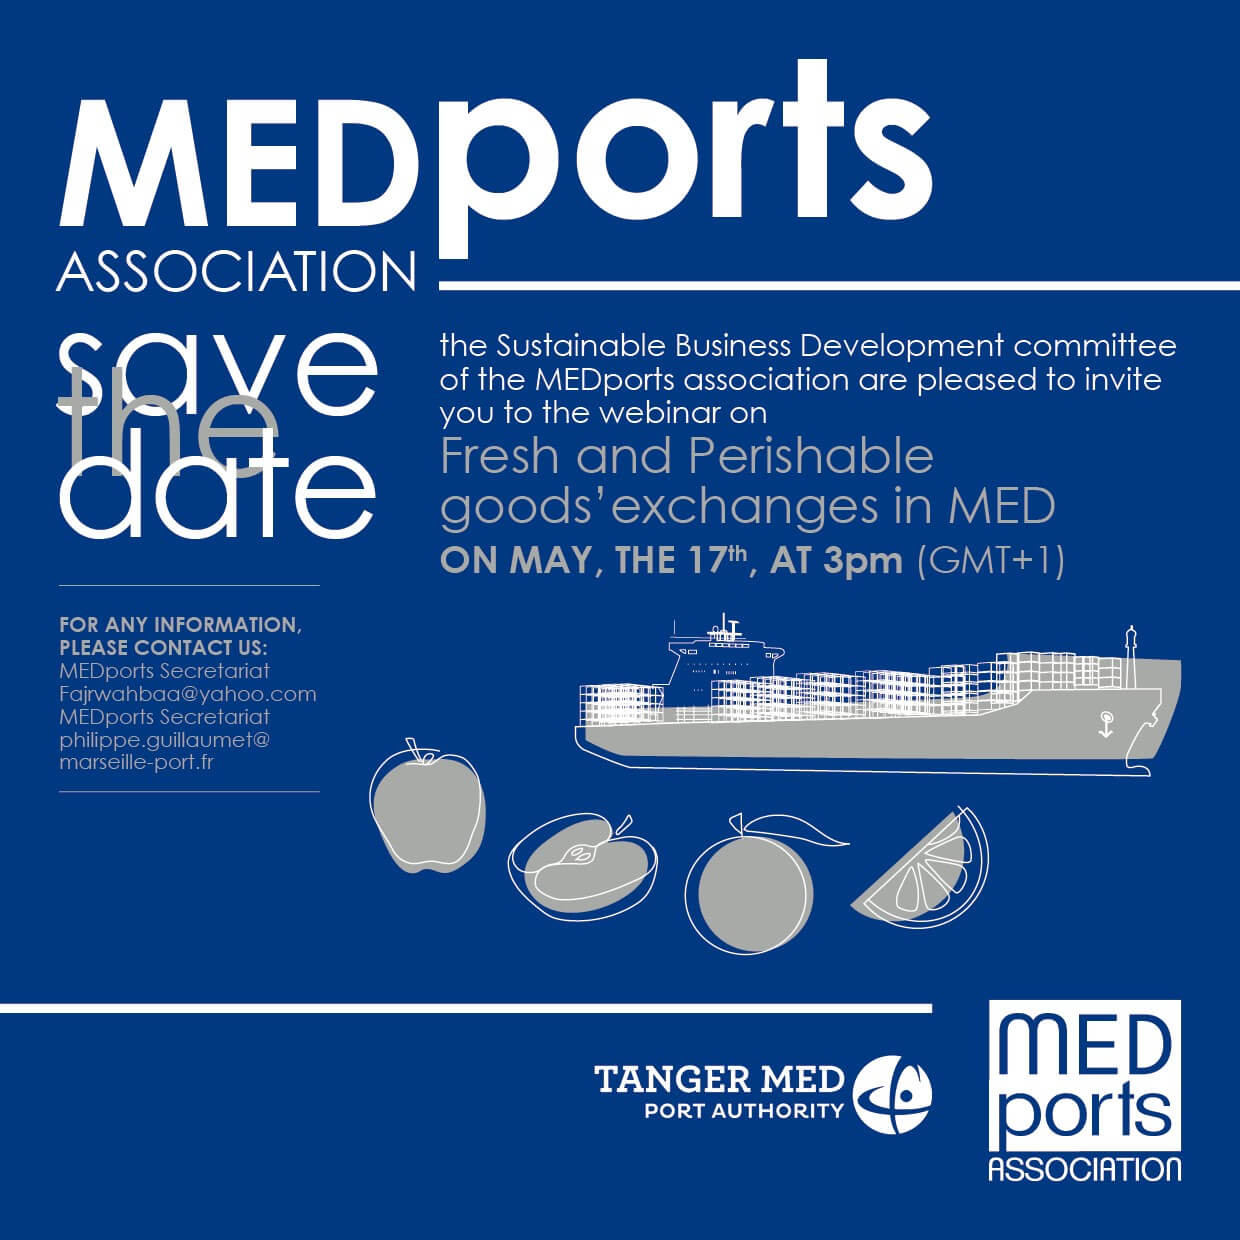 Fresh and Perishable goods' exchanges in MED